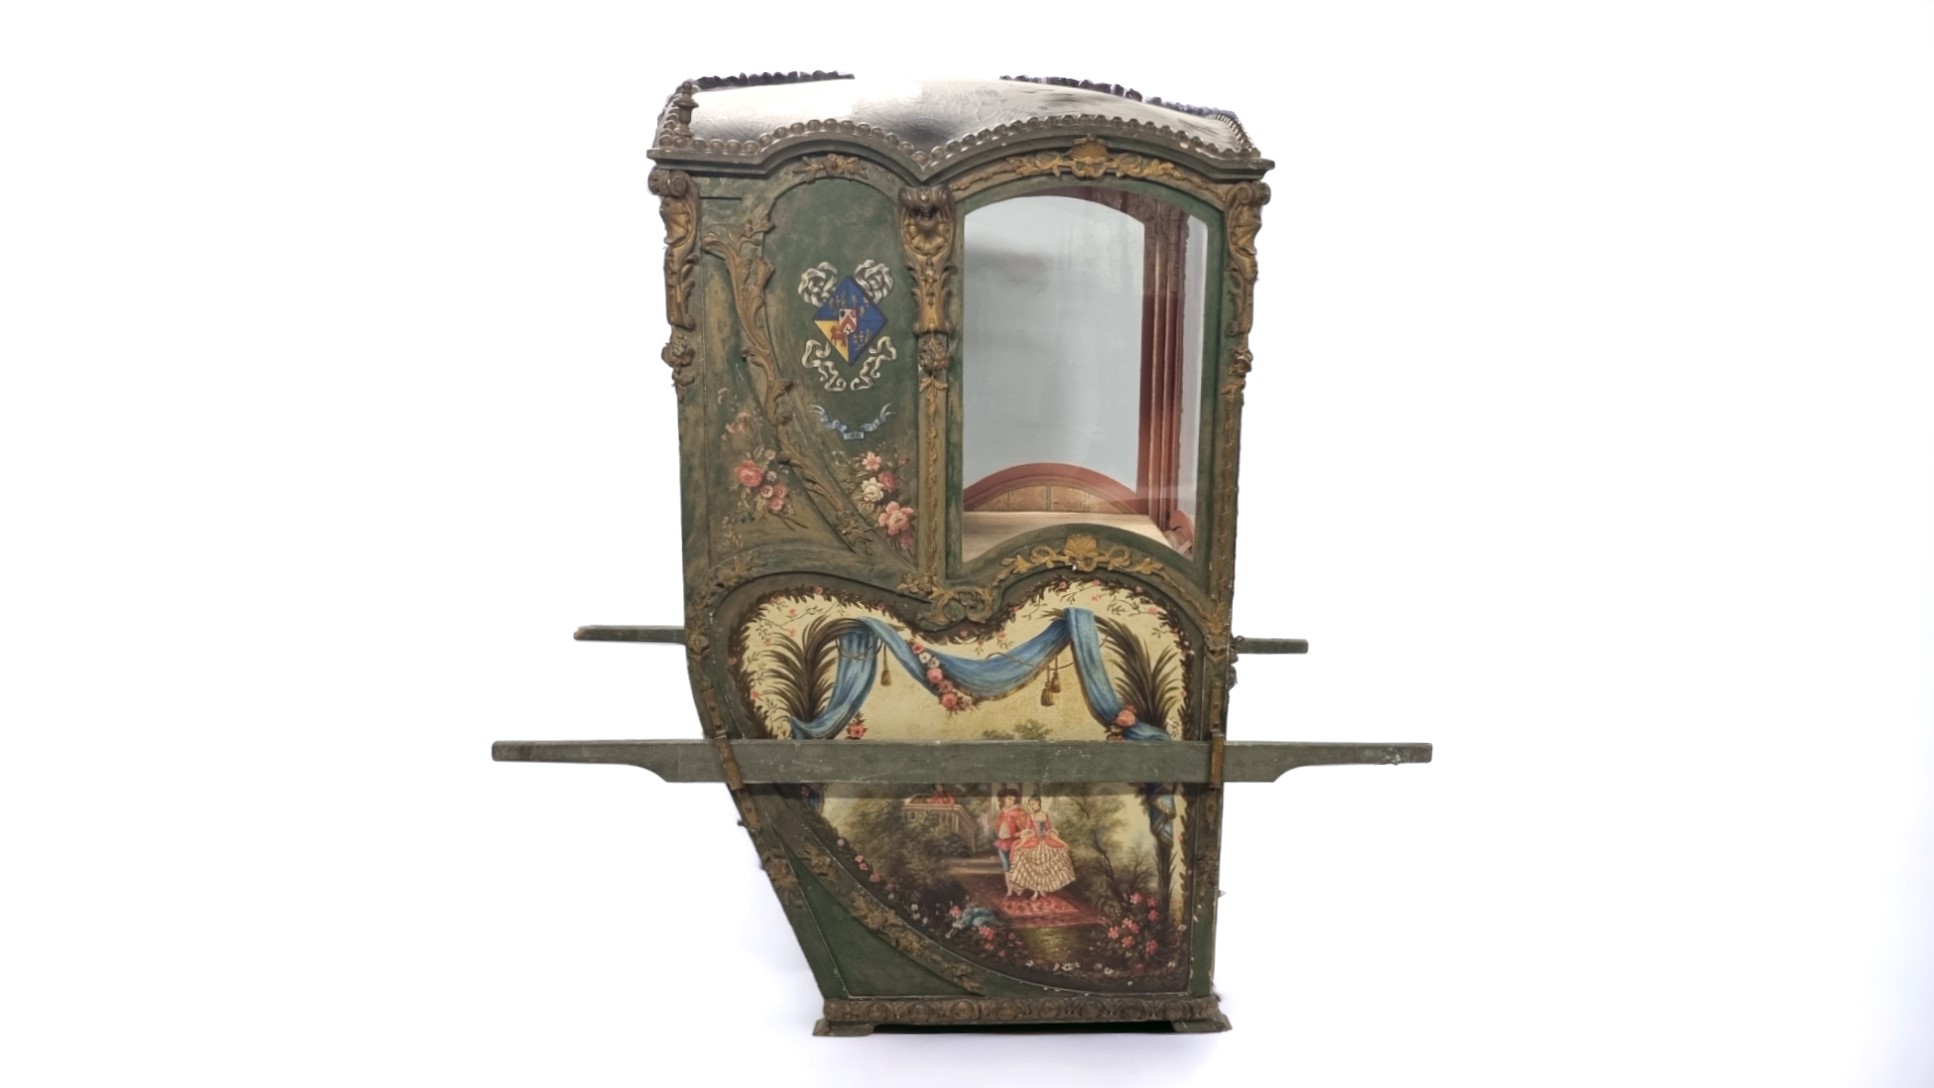 Wooden sedan chair decorated with Louis XV-style "romantic scenes" paintings - Image 2 of 3